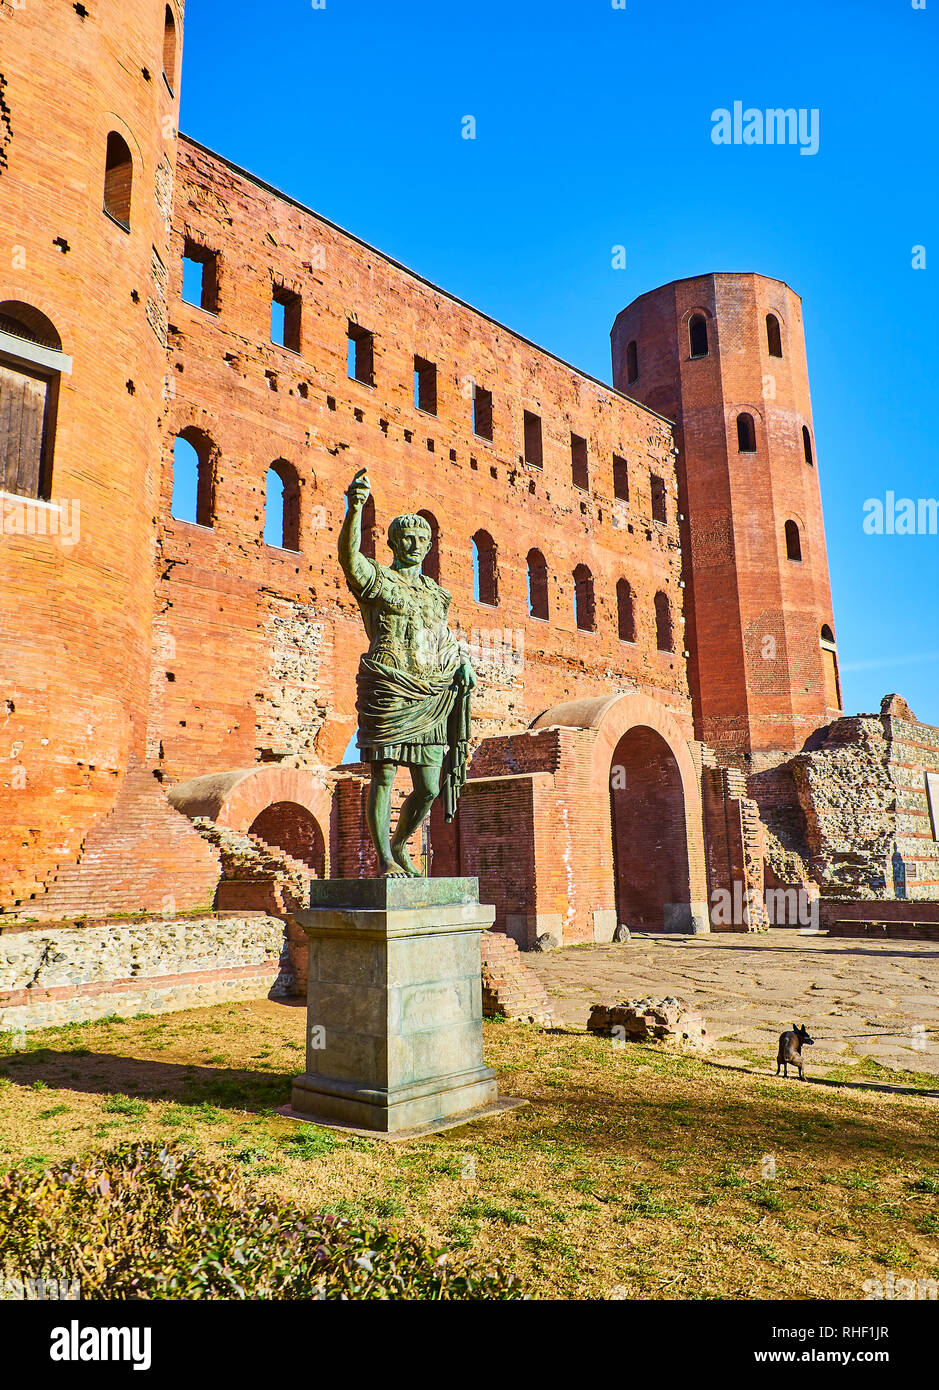 Statue of Augustus Caesar in front of Porta Palatina Gate. Piazza Cesare Augusto square. Turin, Piedmont, Italy. Stock Photo